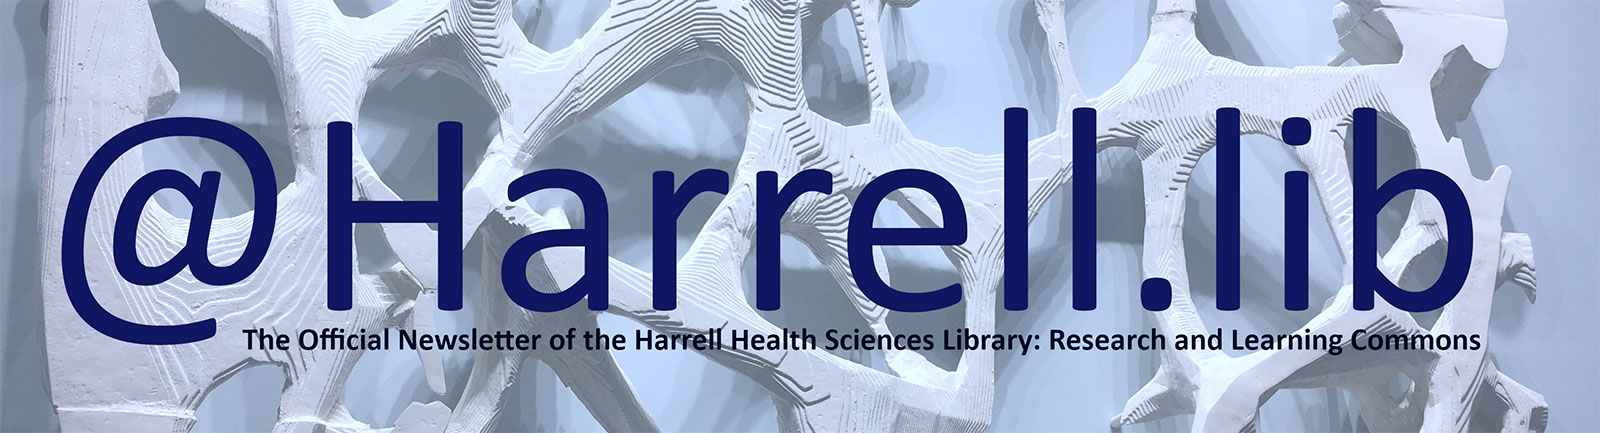 An image says @Harrell.lib: The Official Newsletter of the Harrell Health Sciences Library Research and Learning Commons.